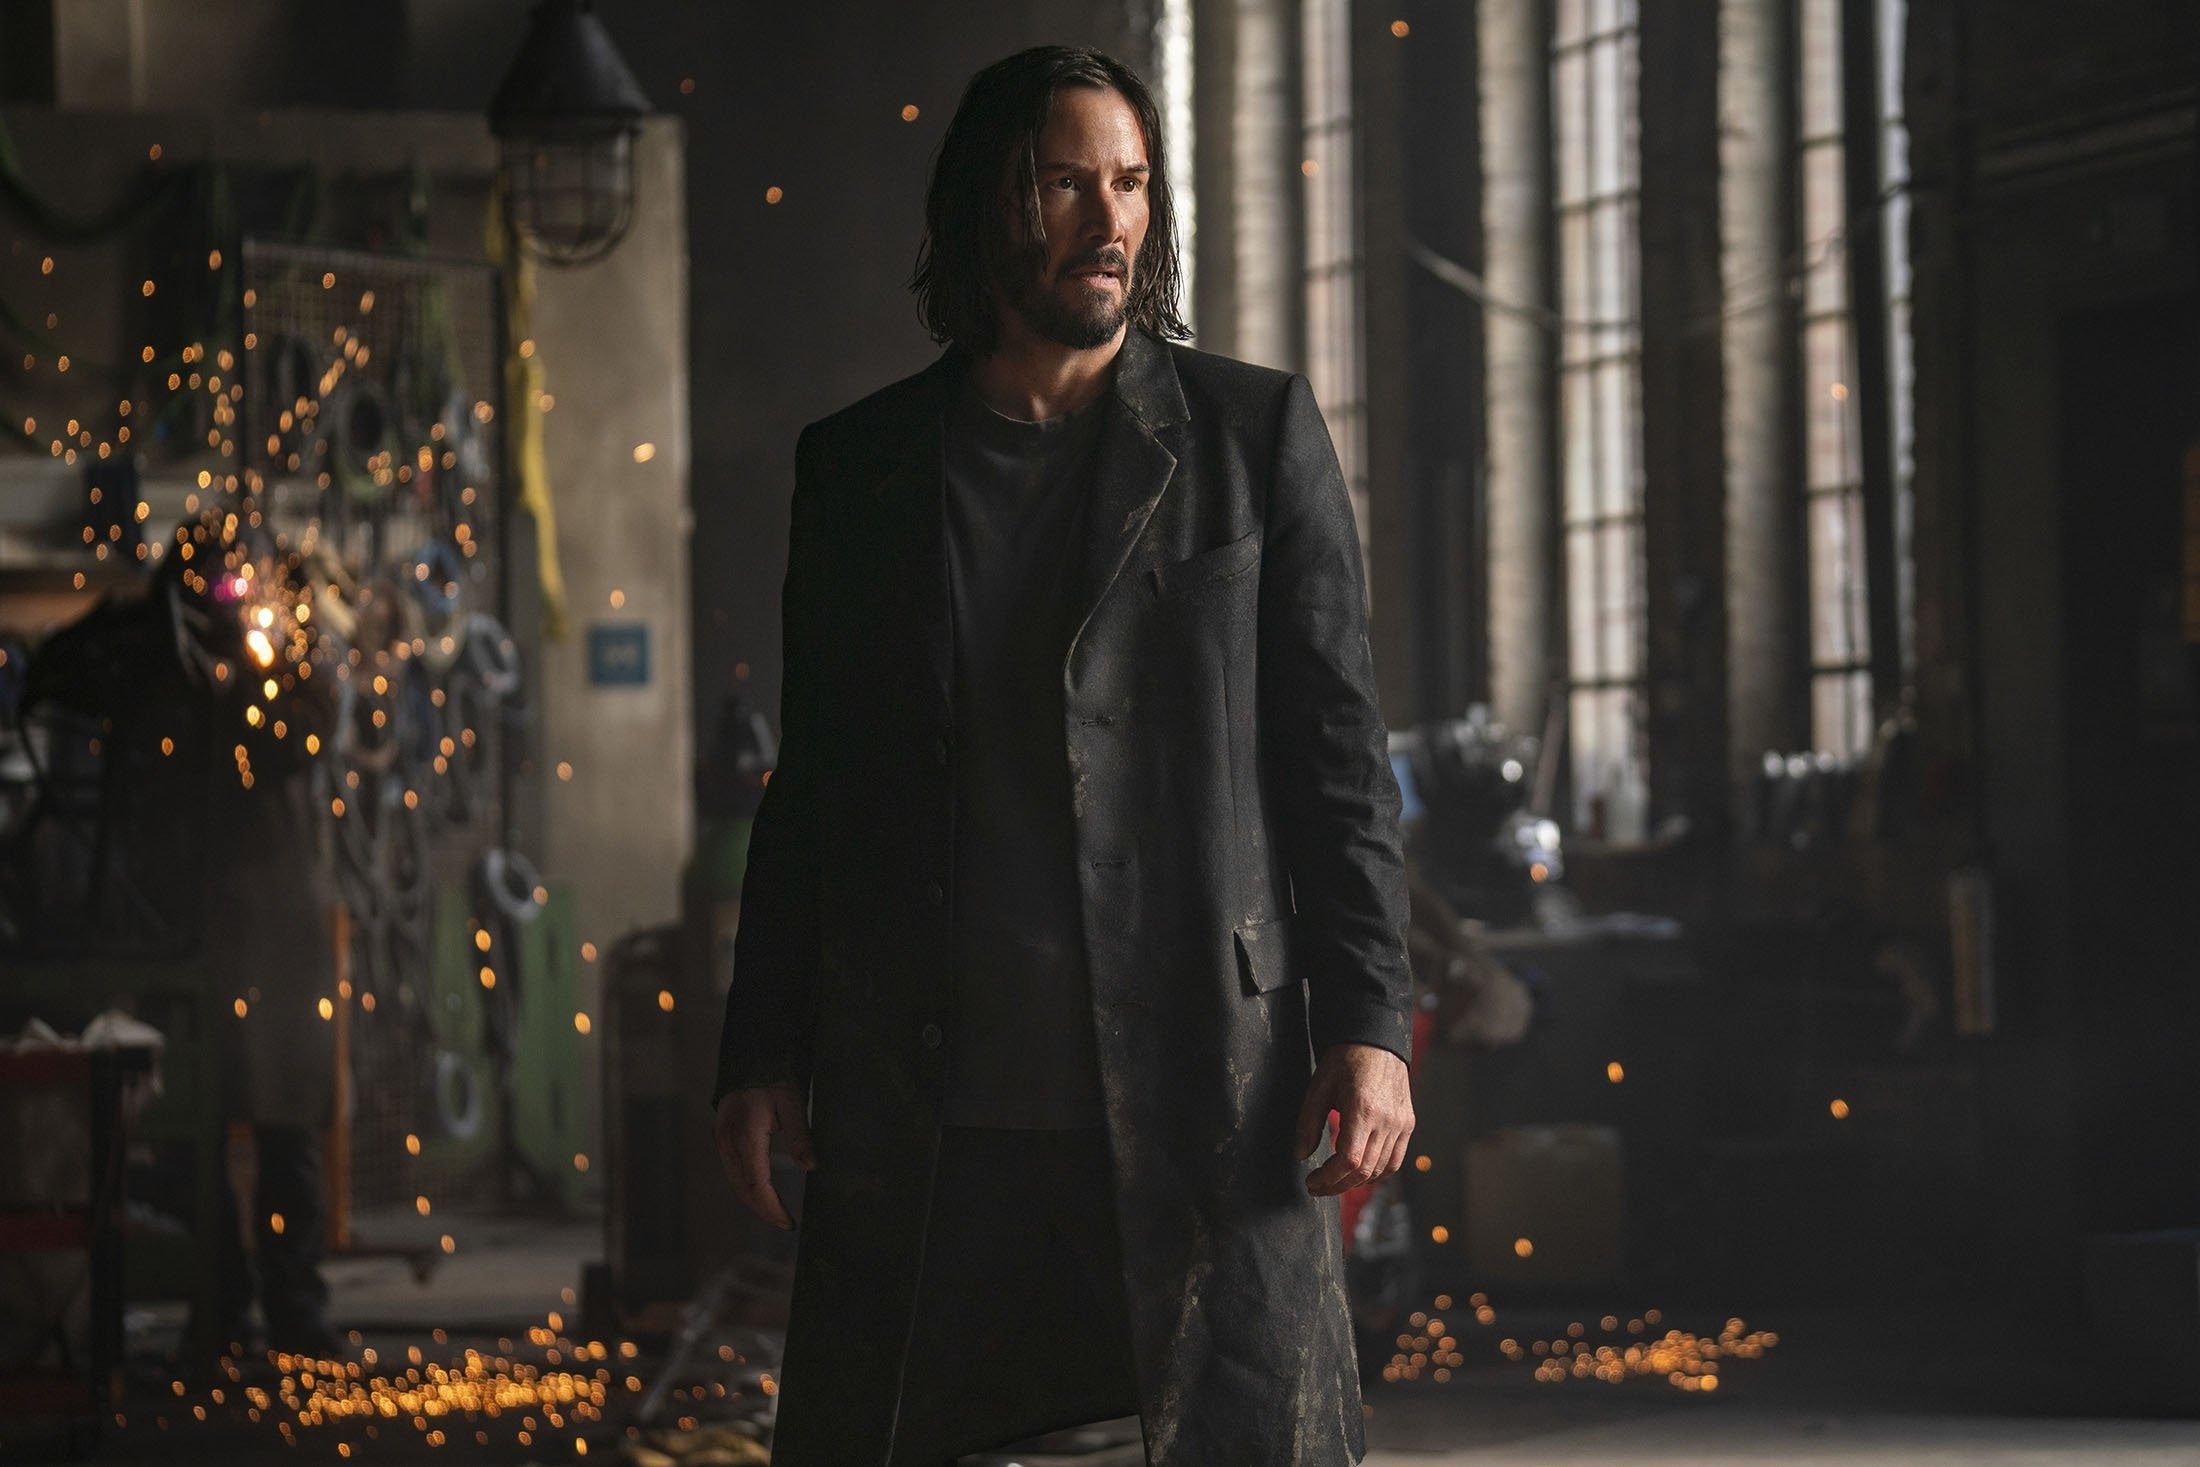 Keanu Reeves, in a scene from the film "The Matrix Resurrections." (Warner Bros. via AP)